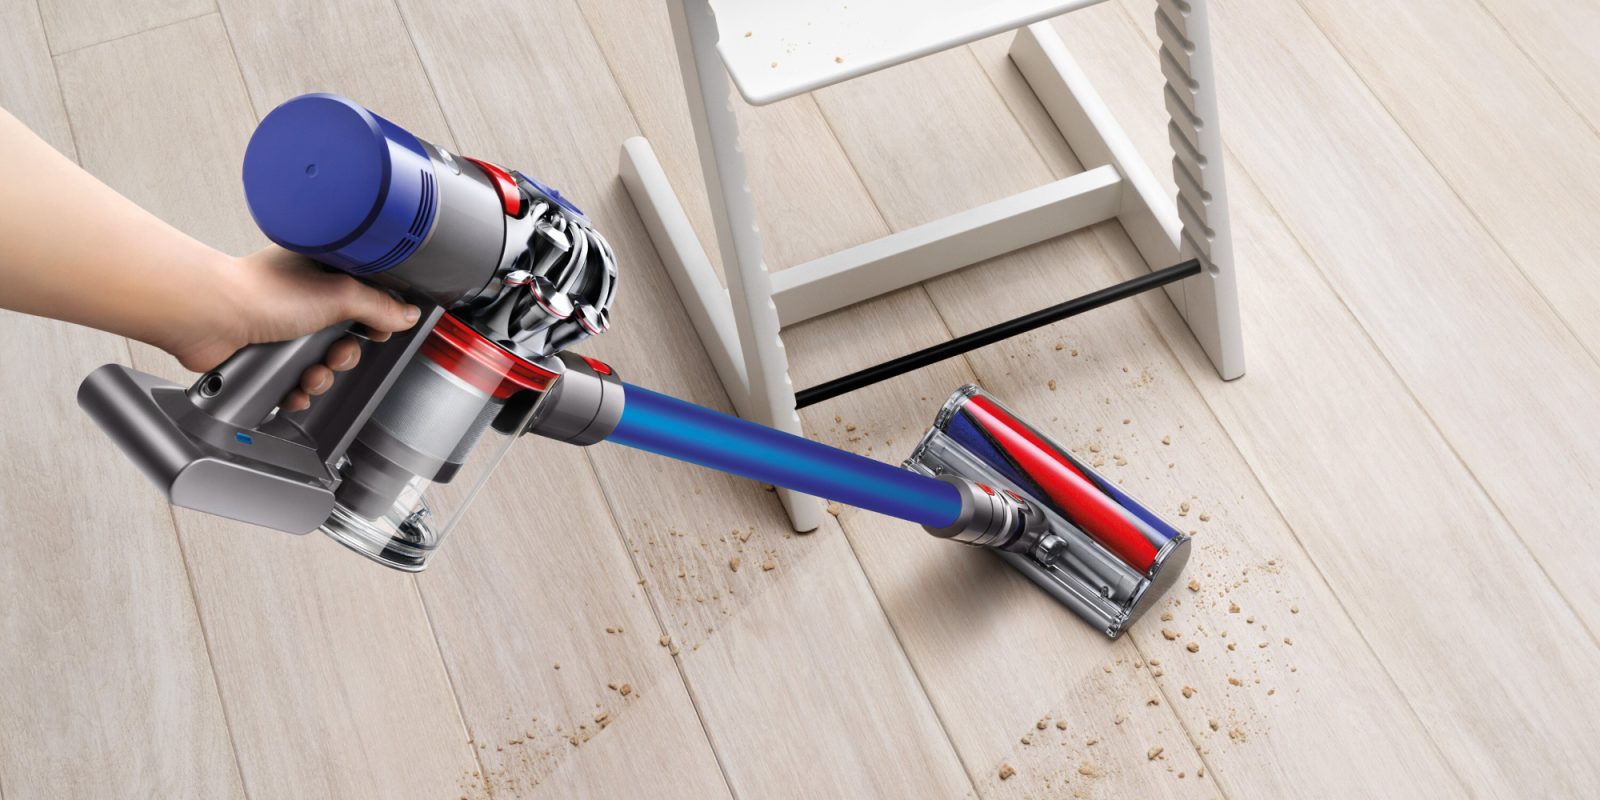 A new Dyson V7 Fluffy Cordless Vacuum is yours for $200 ...